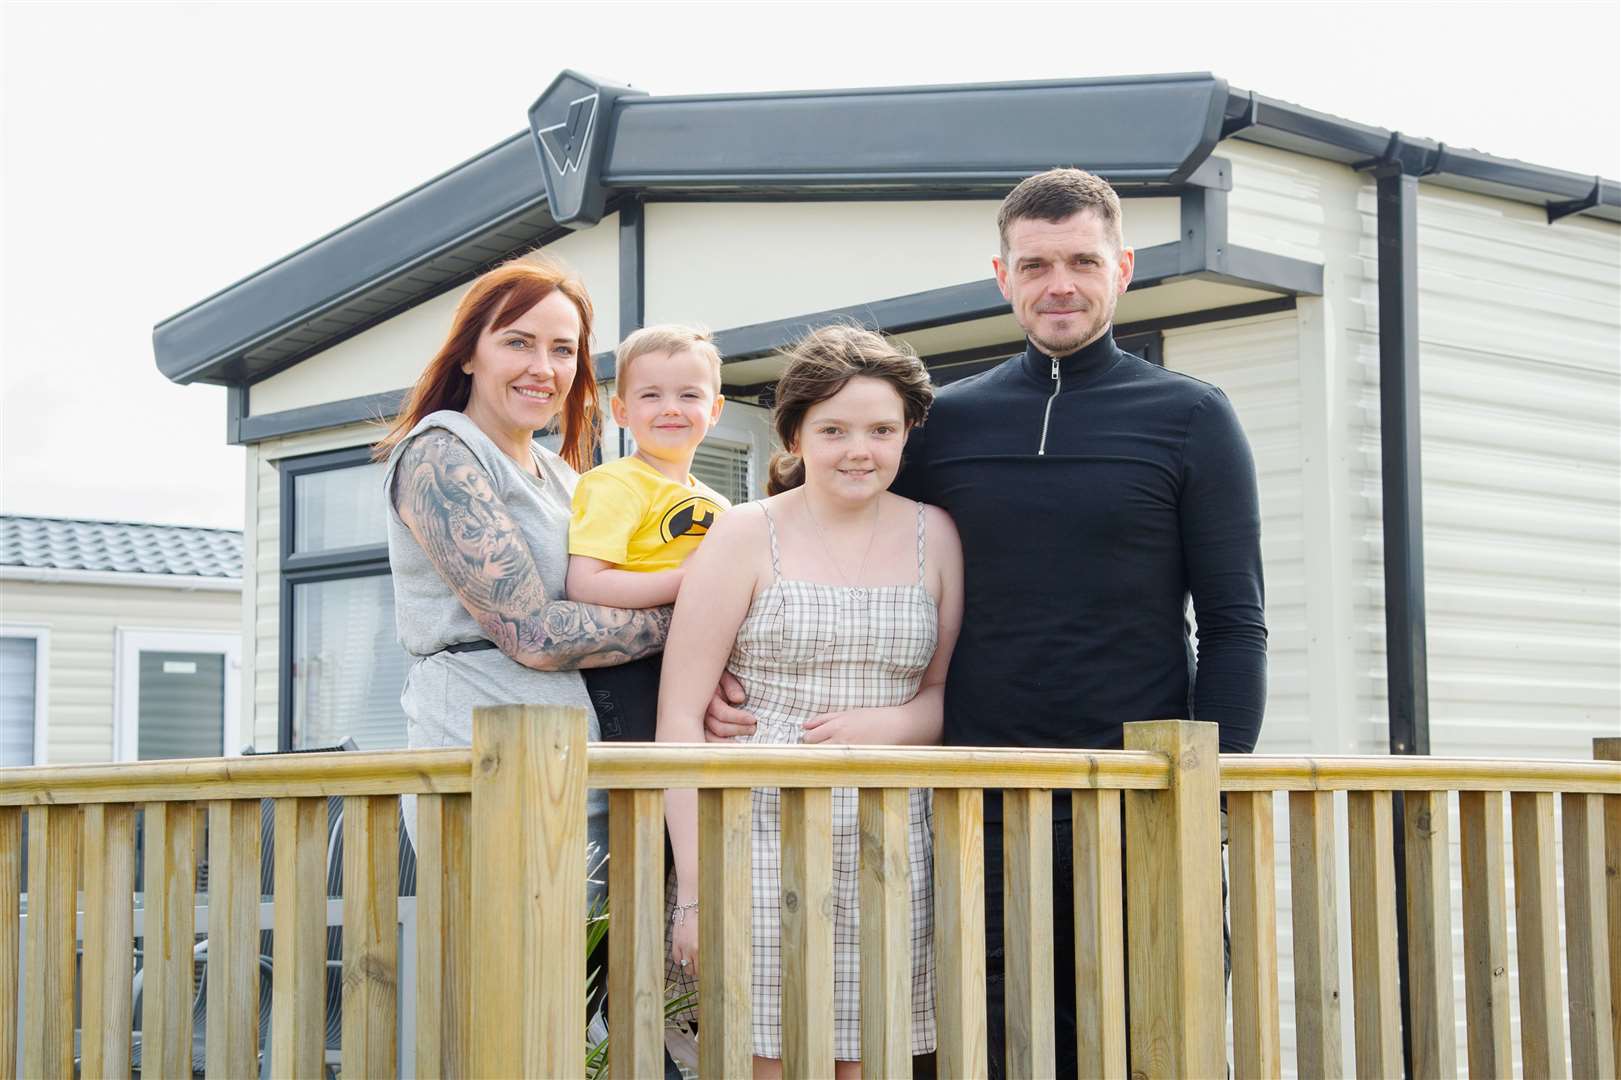 Logan's Fund last week reopened its Sunny Days holiday home in Lossiemouth to welcome Rutherglen family Kaiann Macallister, brother Karsson, mum Sharon and dad Mark. Picture: Daniel Forsyth.